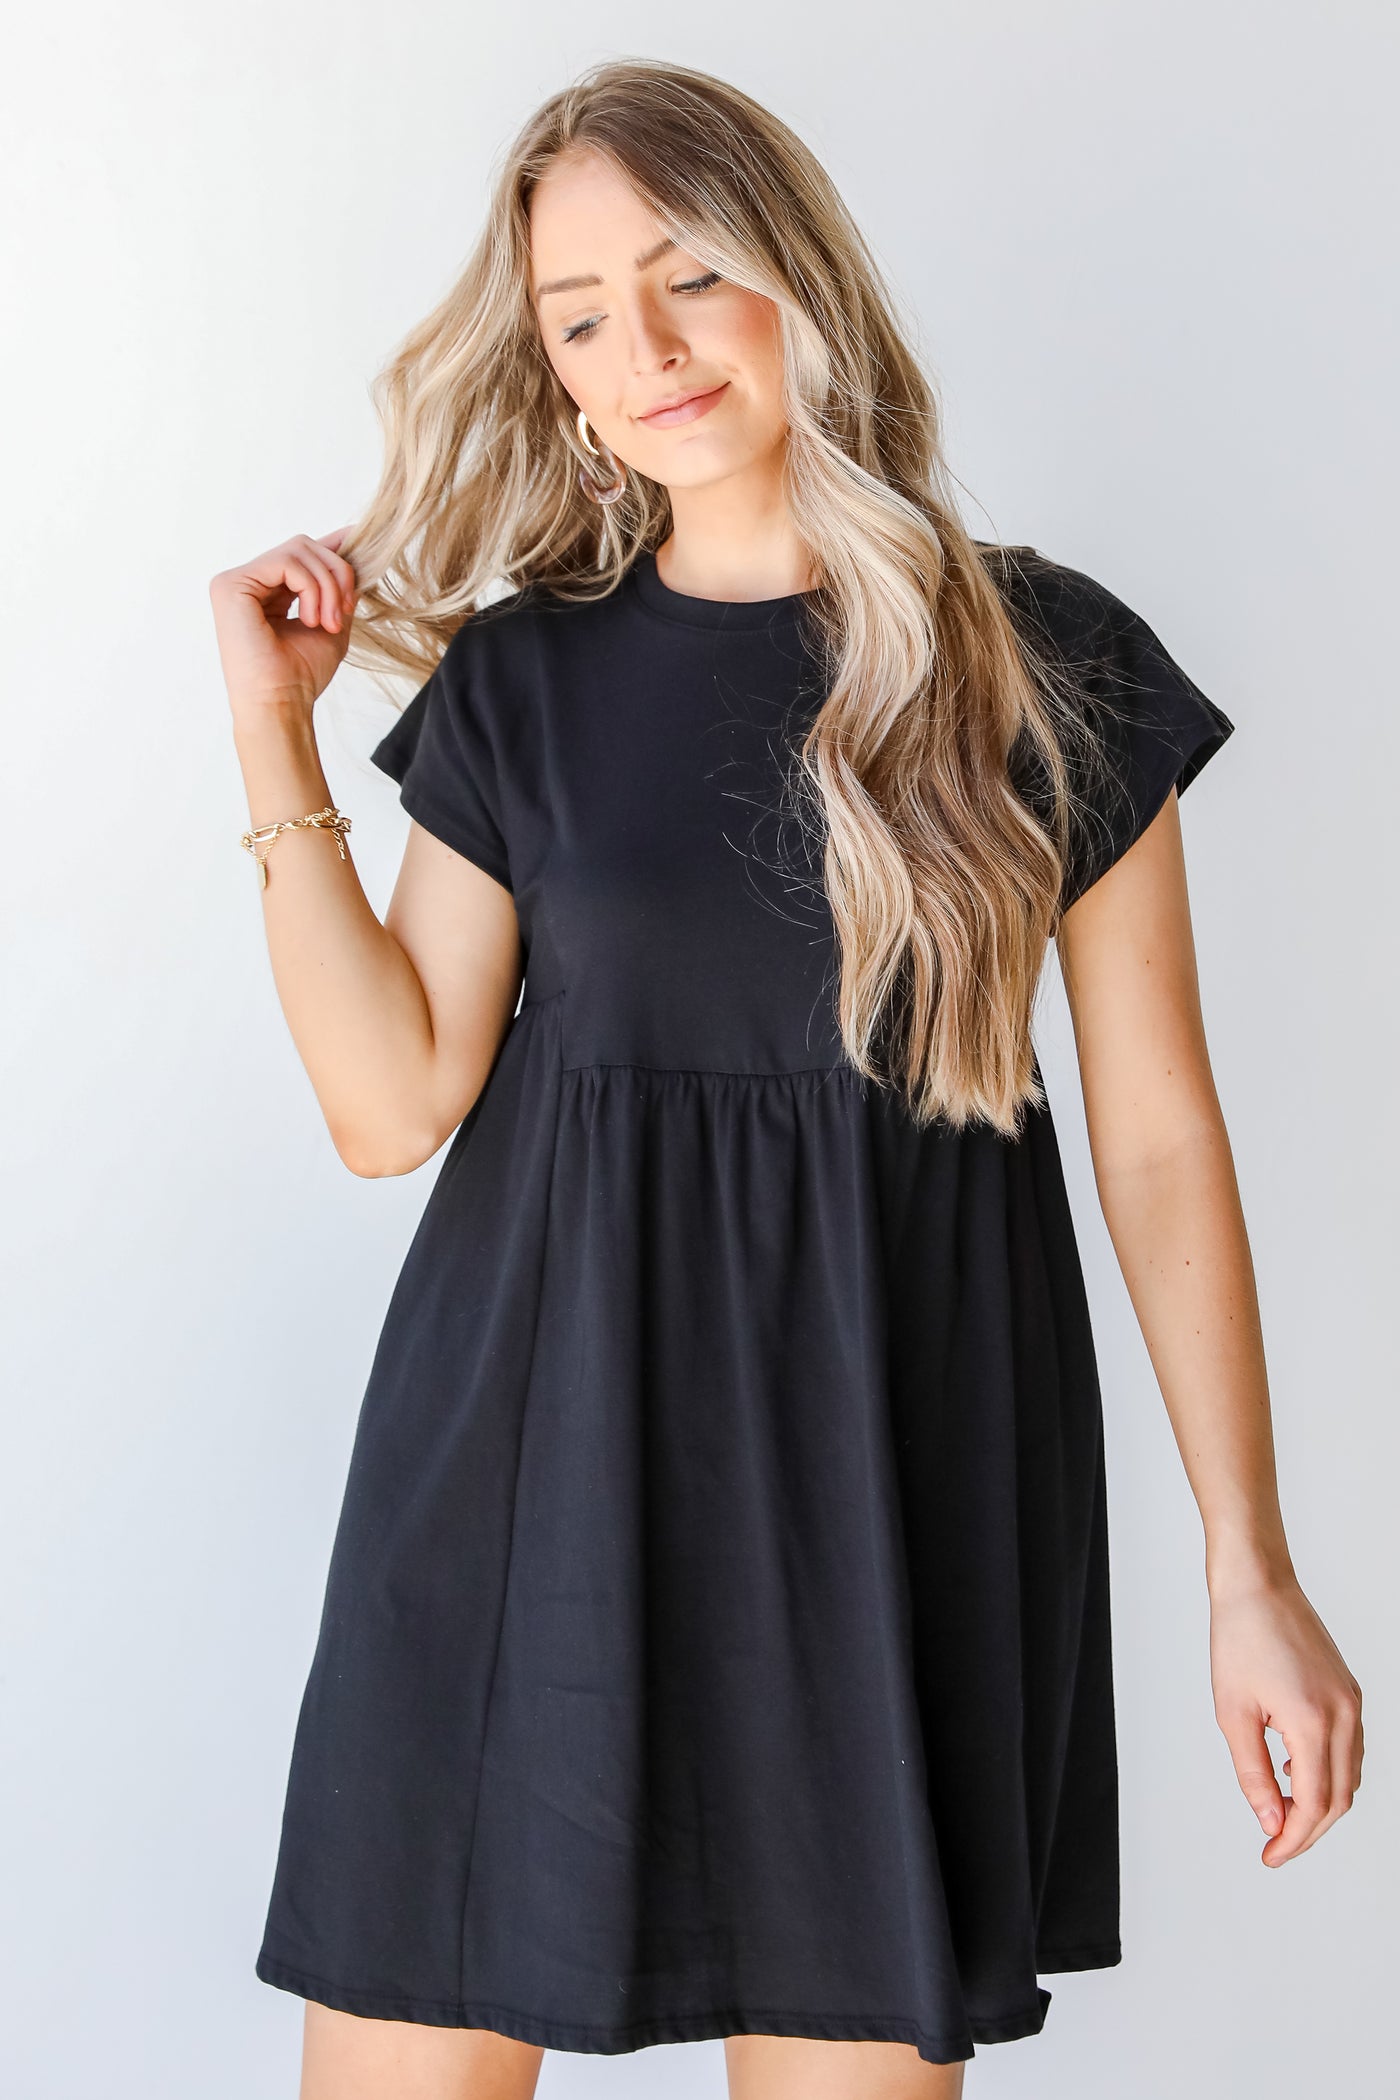 Babydoll Dress in black front view